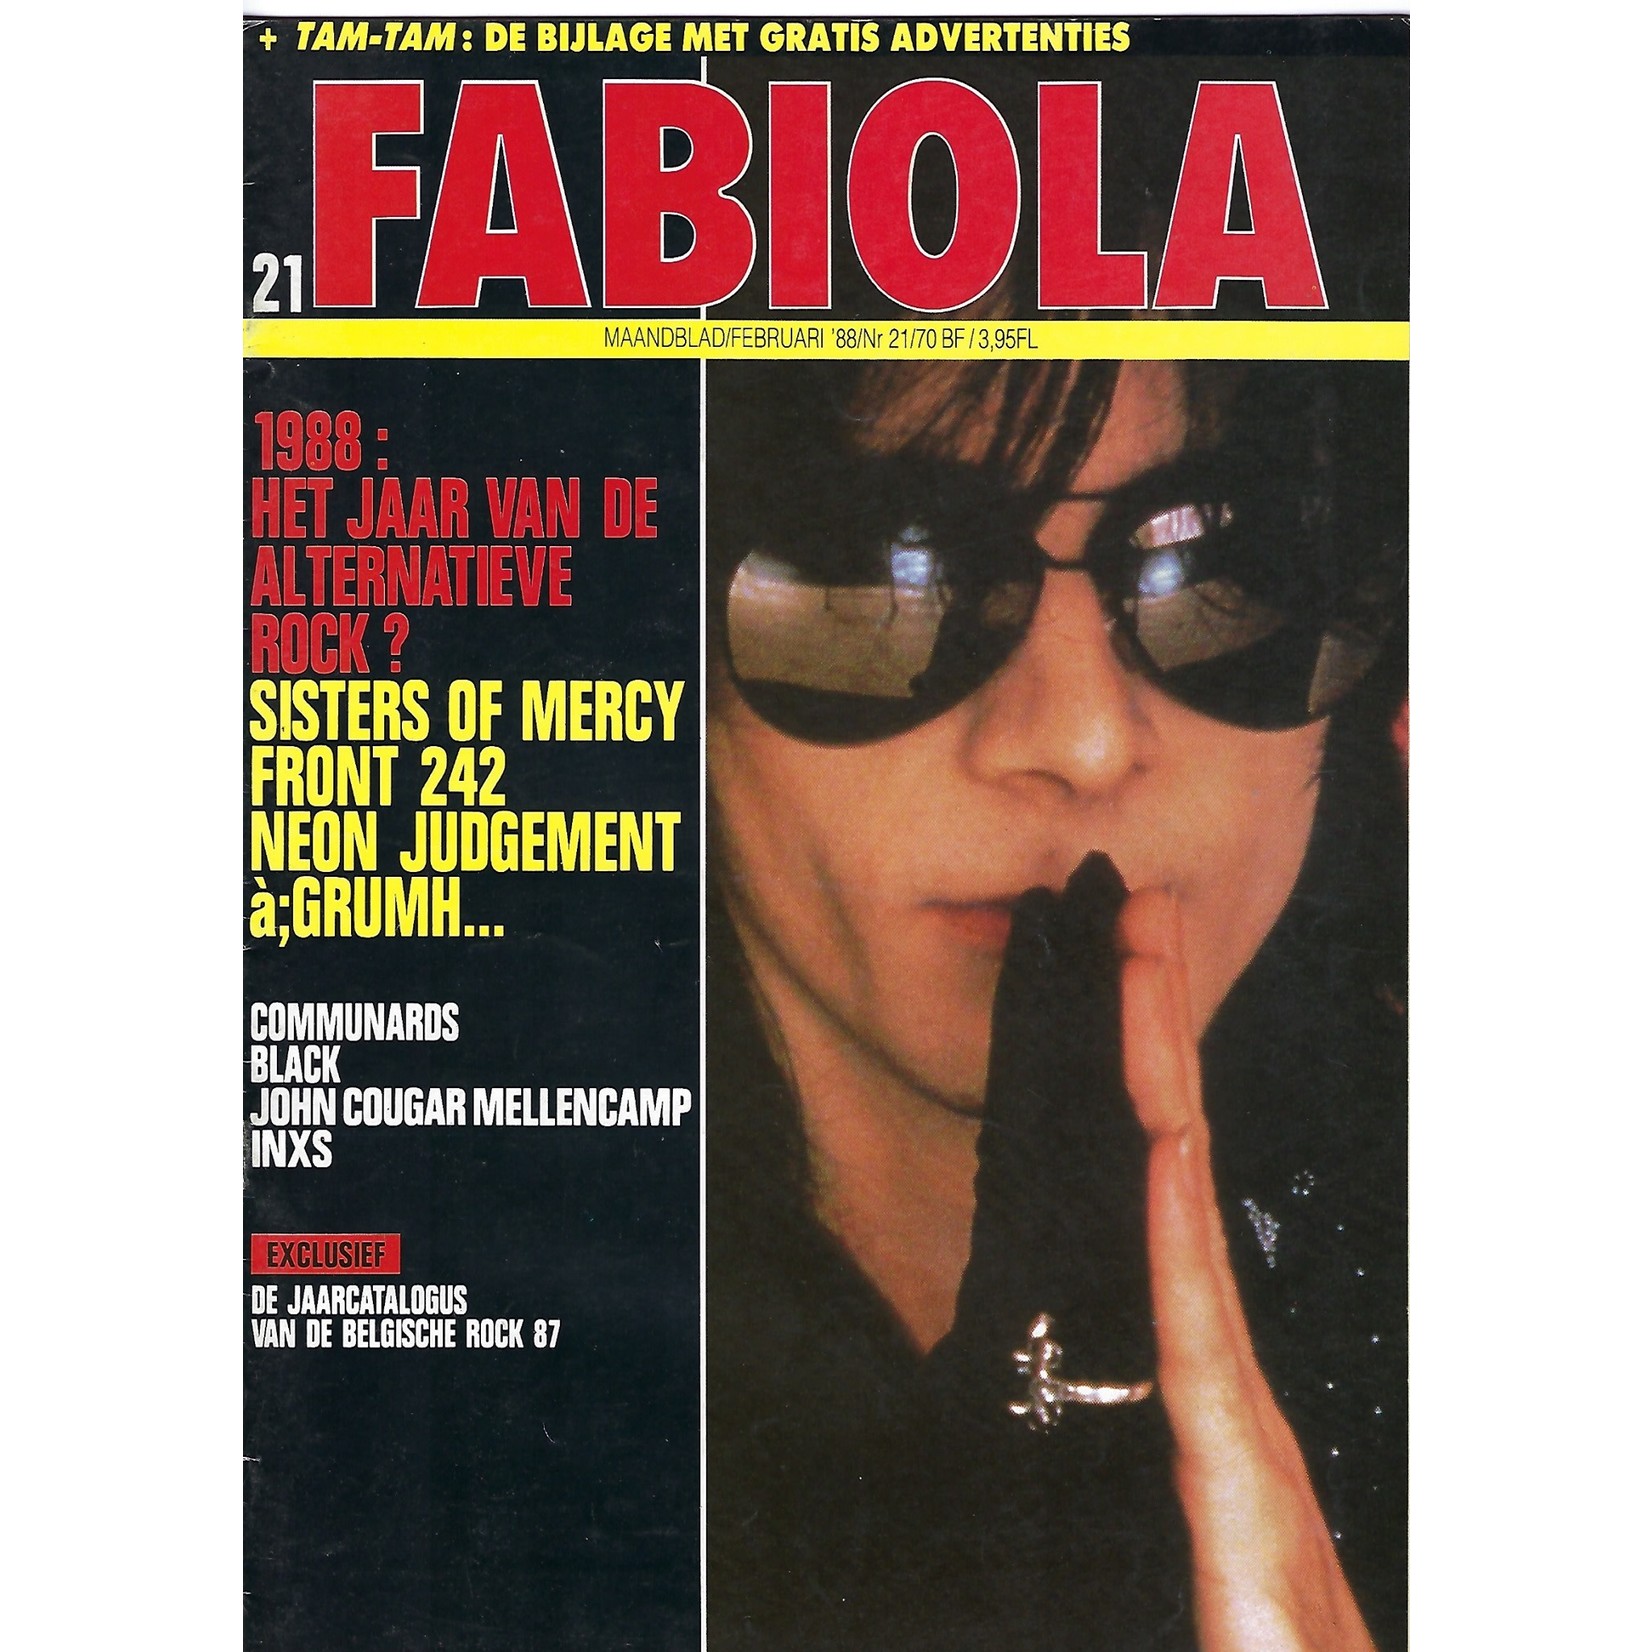 FABIOLA MAGAZINE - #21/1988 (sisters of mercy, front 242...)